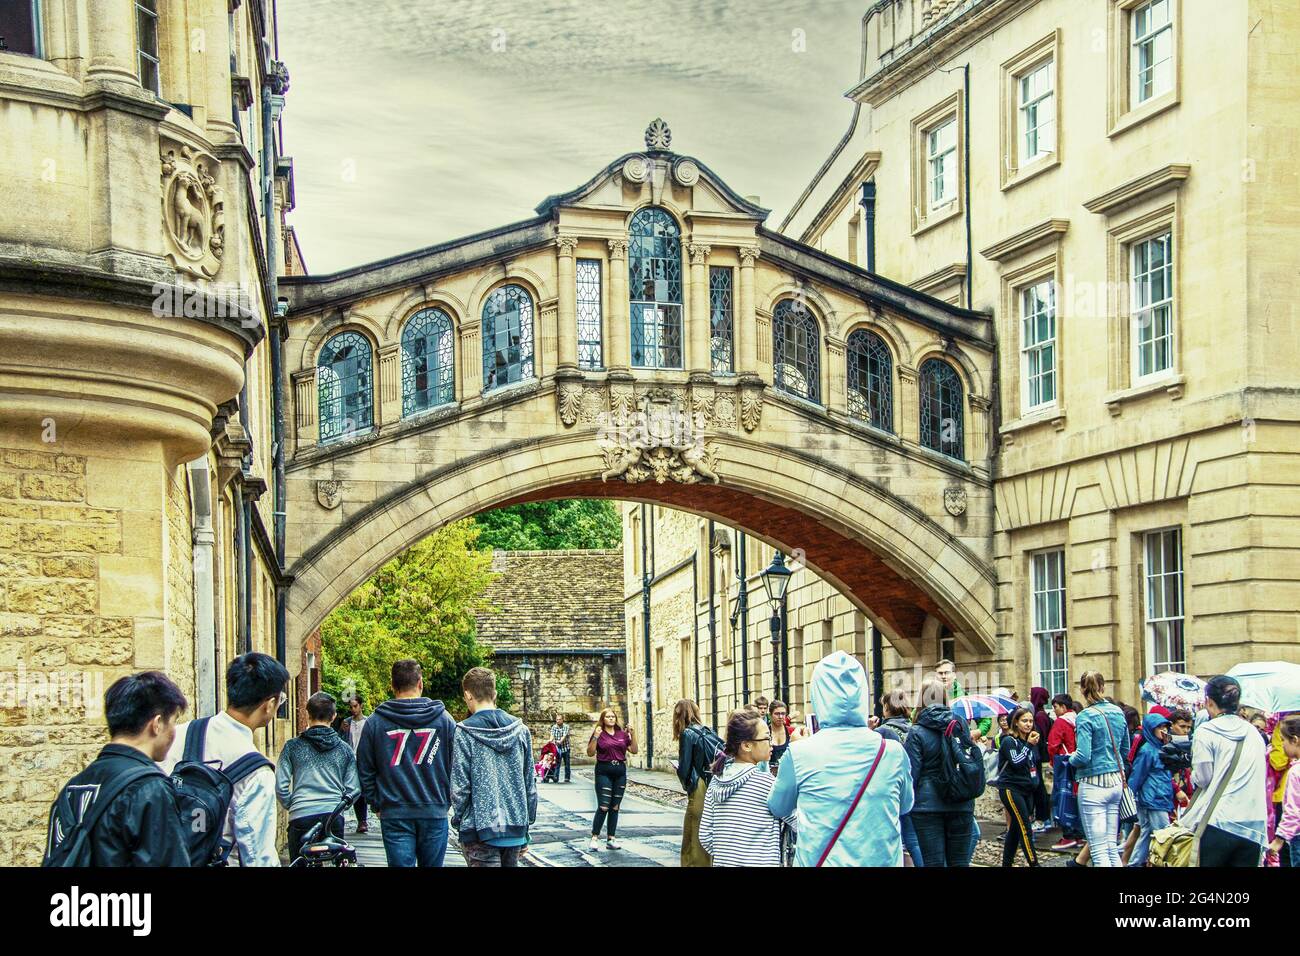 July 27 2019 Oxford UK - Tourists walk downn stree and under the bridge of sighs in Oxford on rainy overcast day. Stock Photo